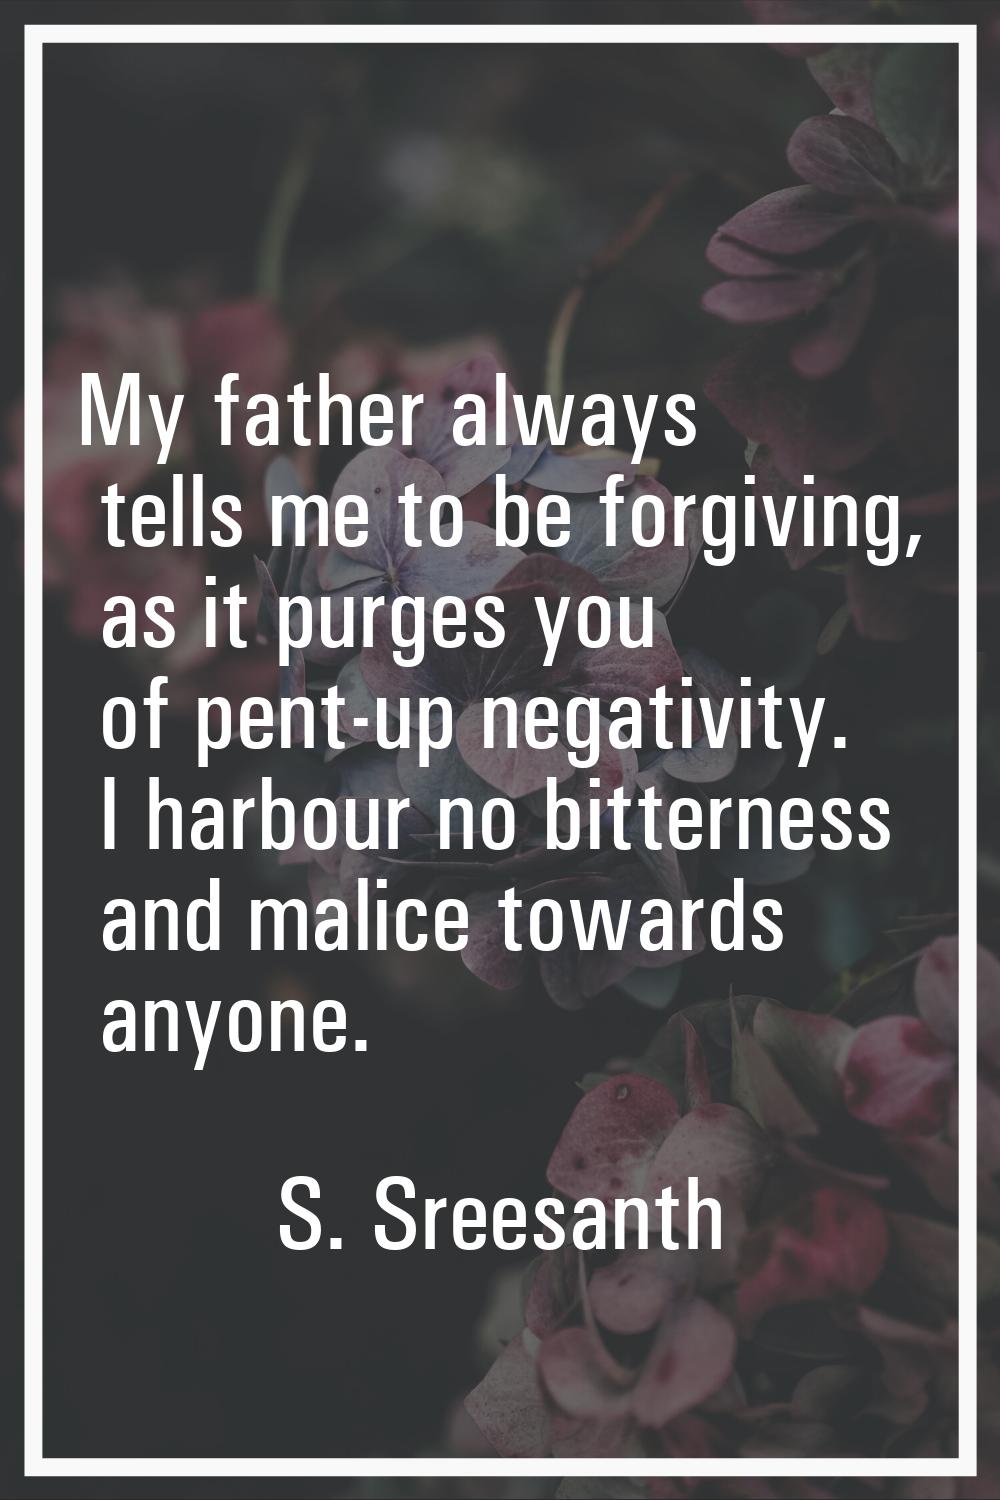 My father always tells me to be forgiving, as it purges you of pent-up negativity. I harbour no bit